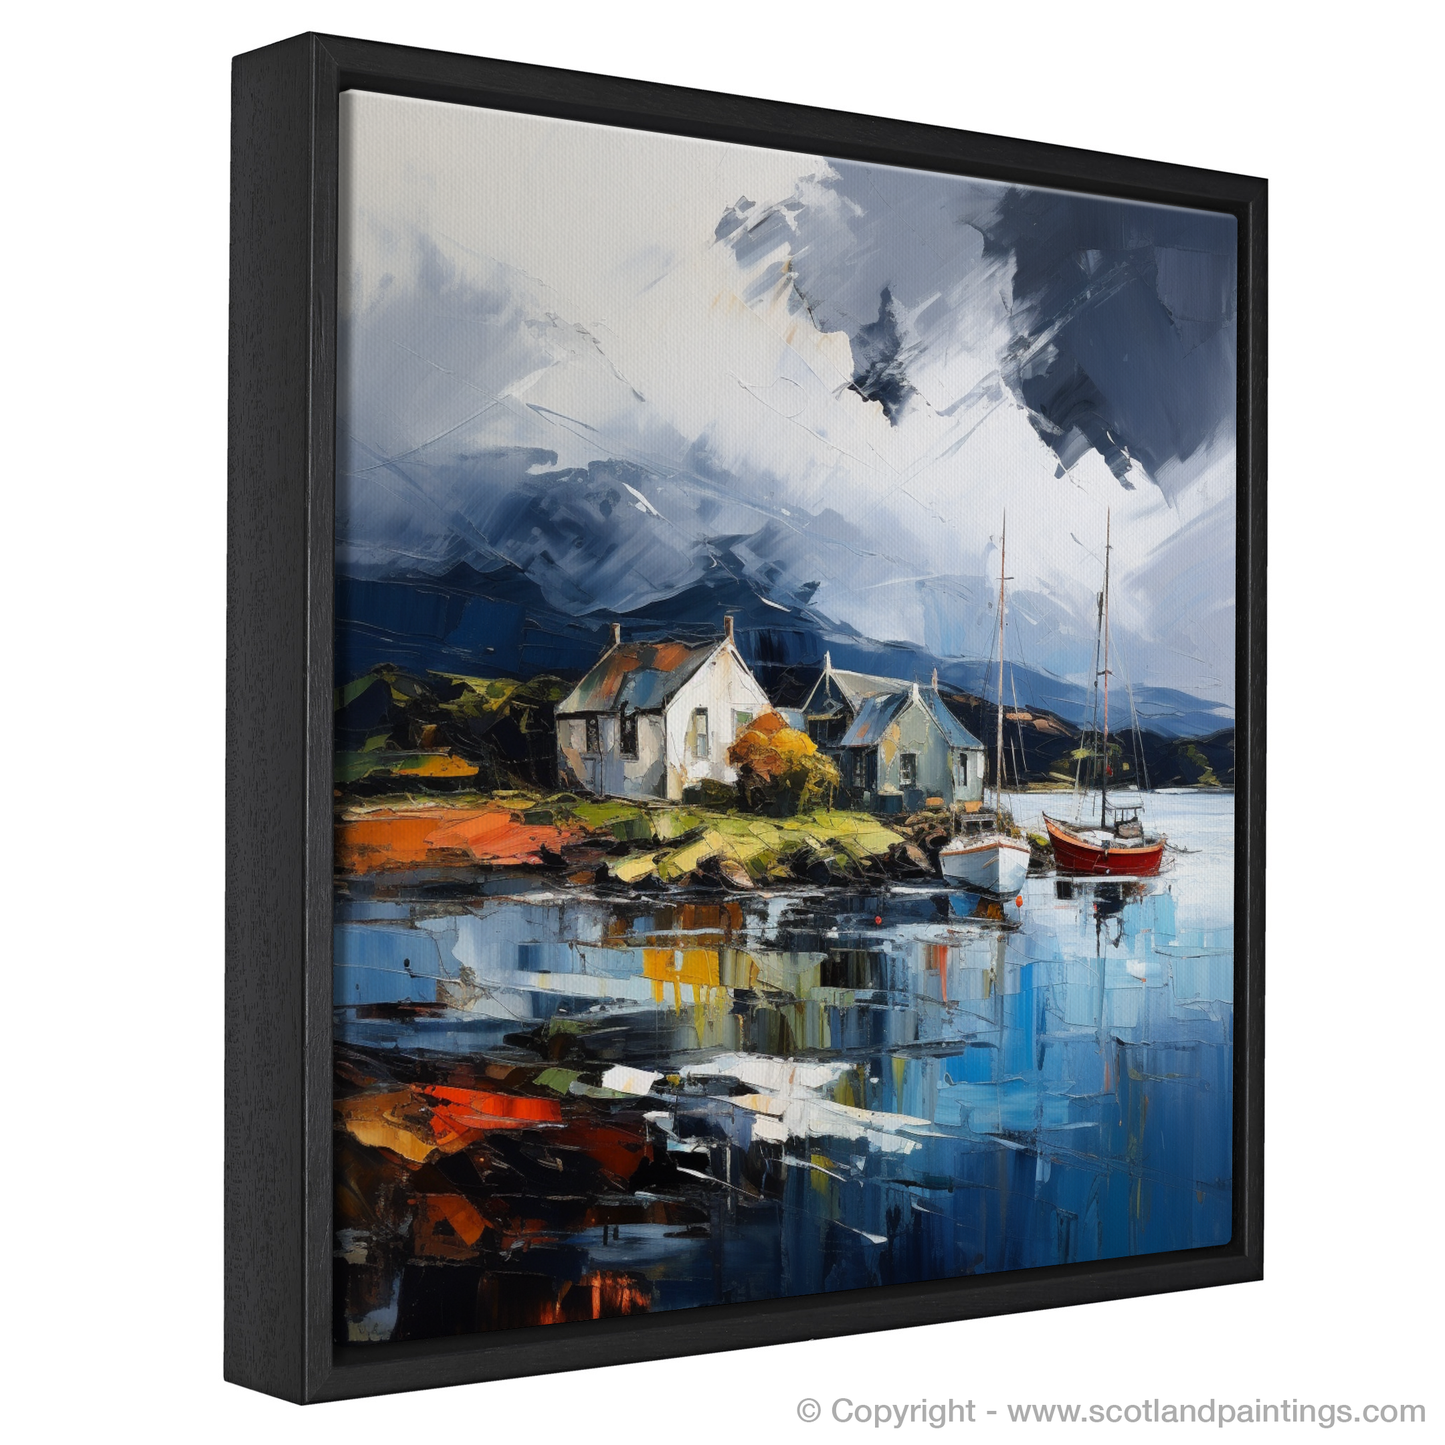 Painting and Art Print of Port Appin Harbour with a stormy sky entitled "Storm Dance at Port Appin Harbour".